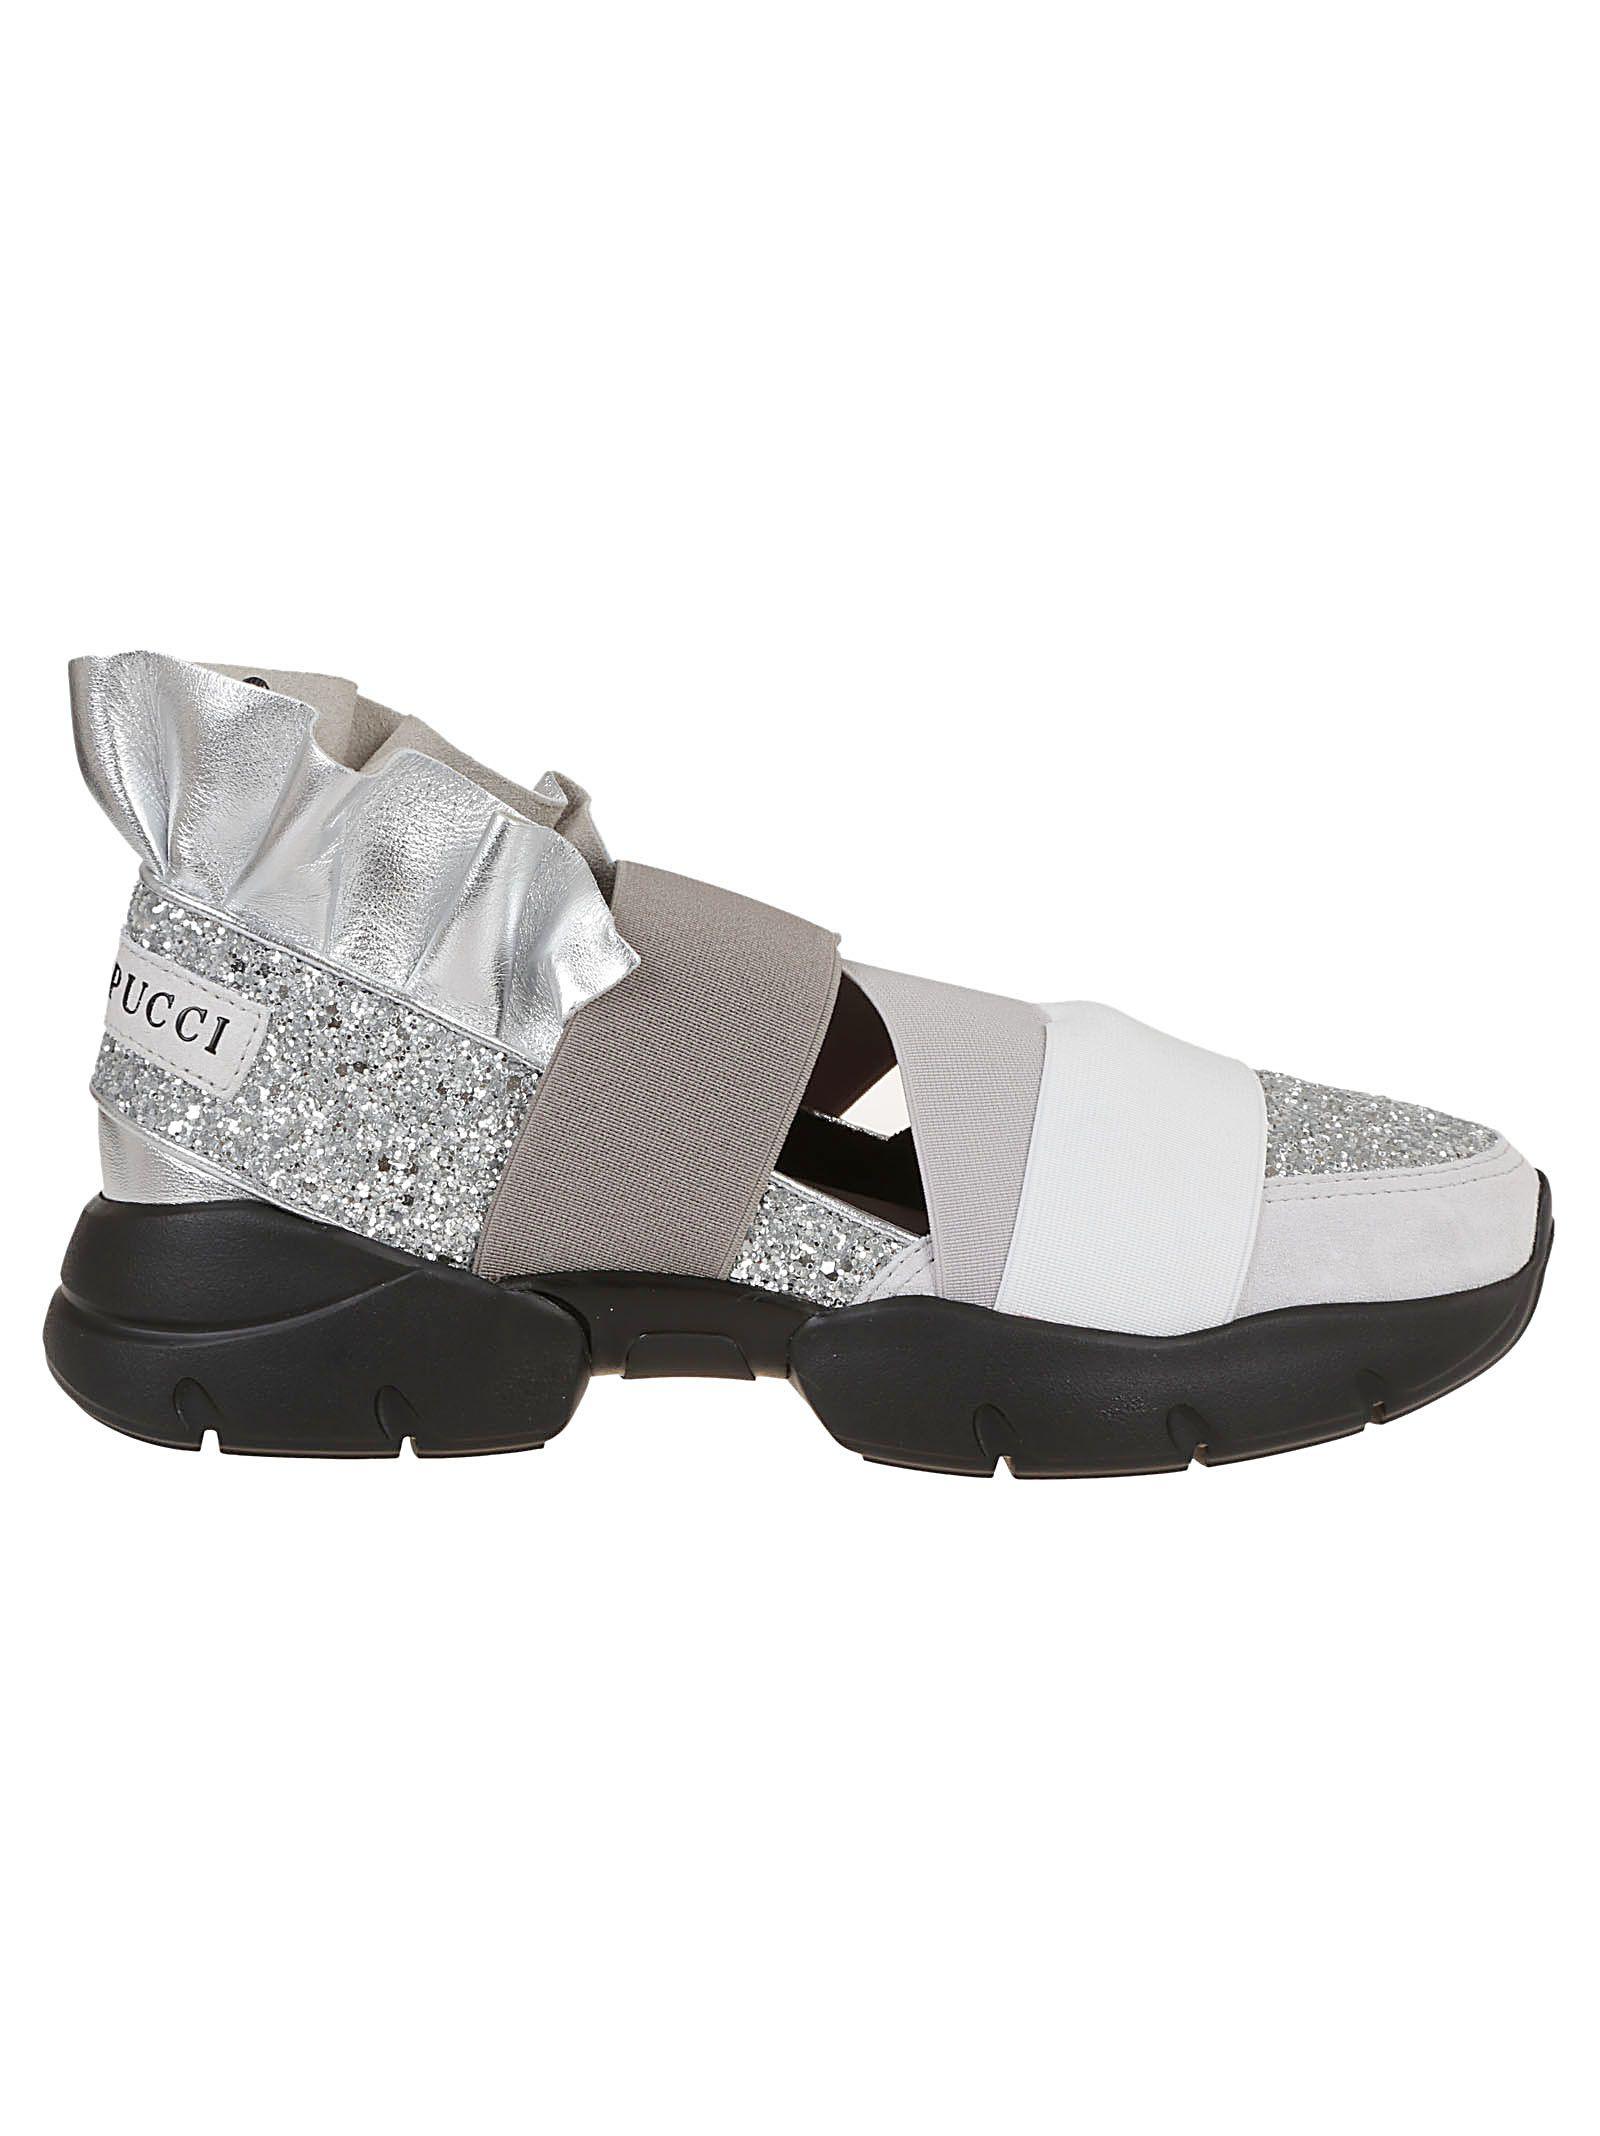 emilio pucci city up sneakers